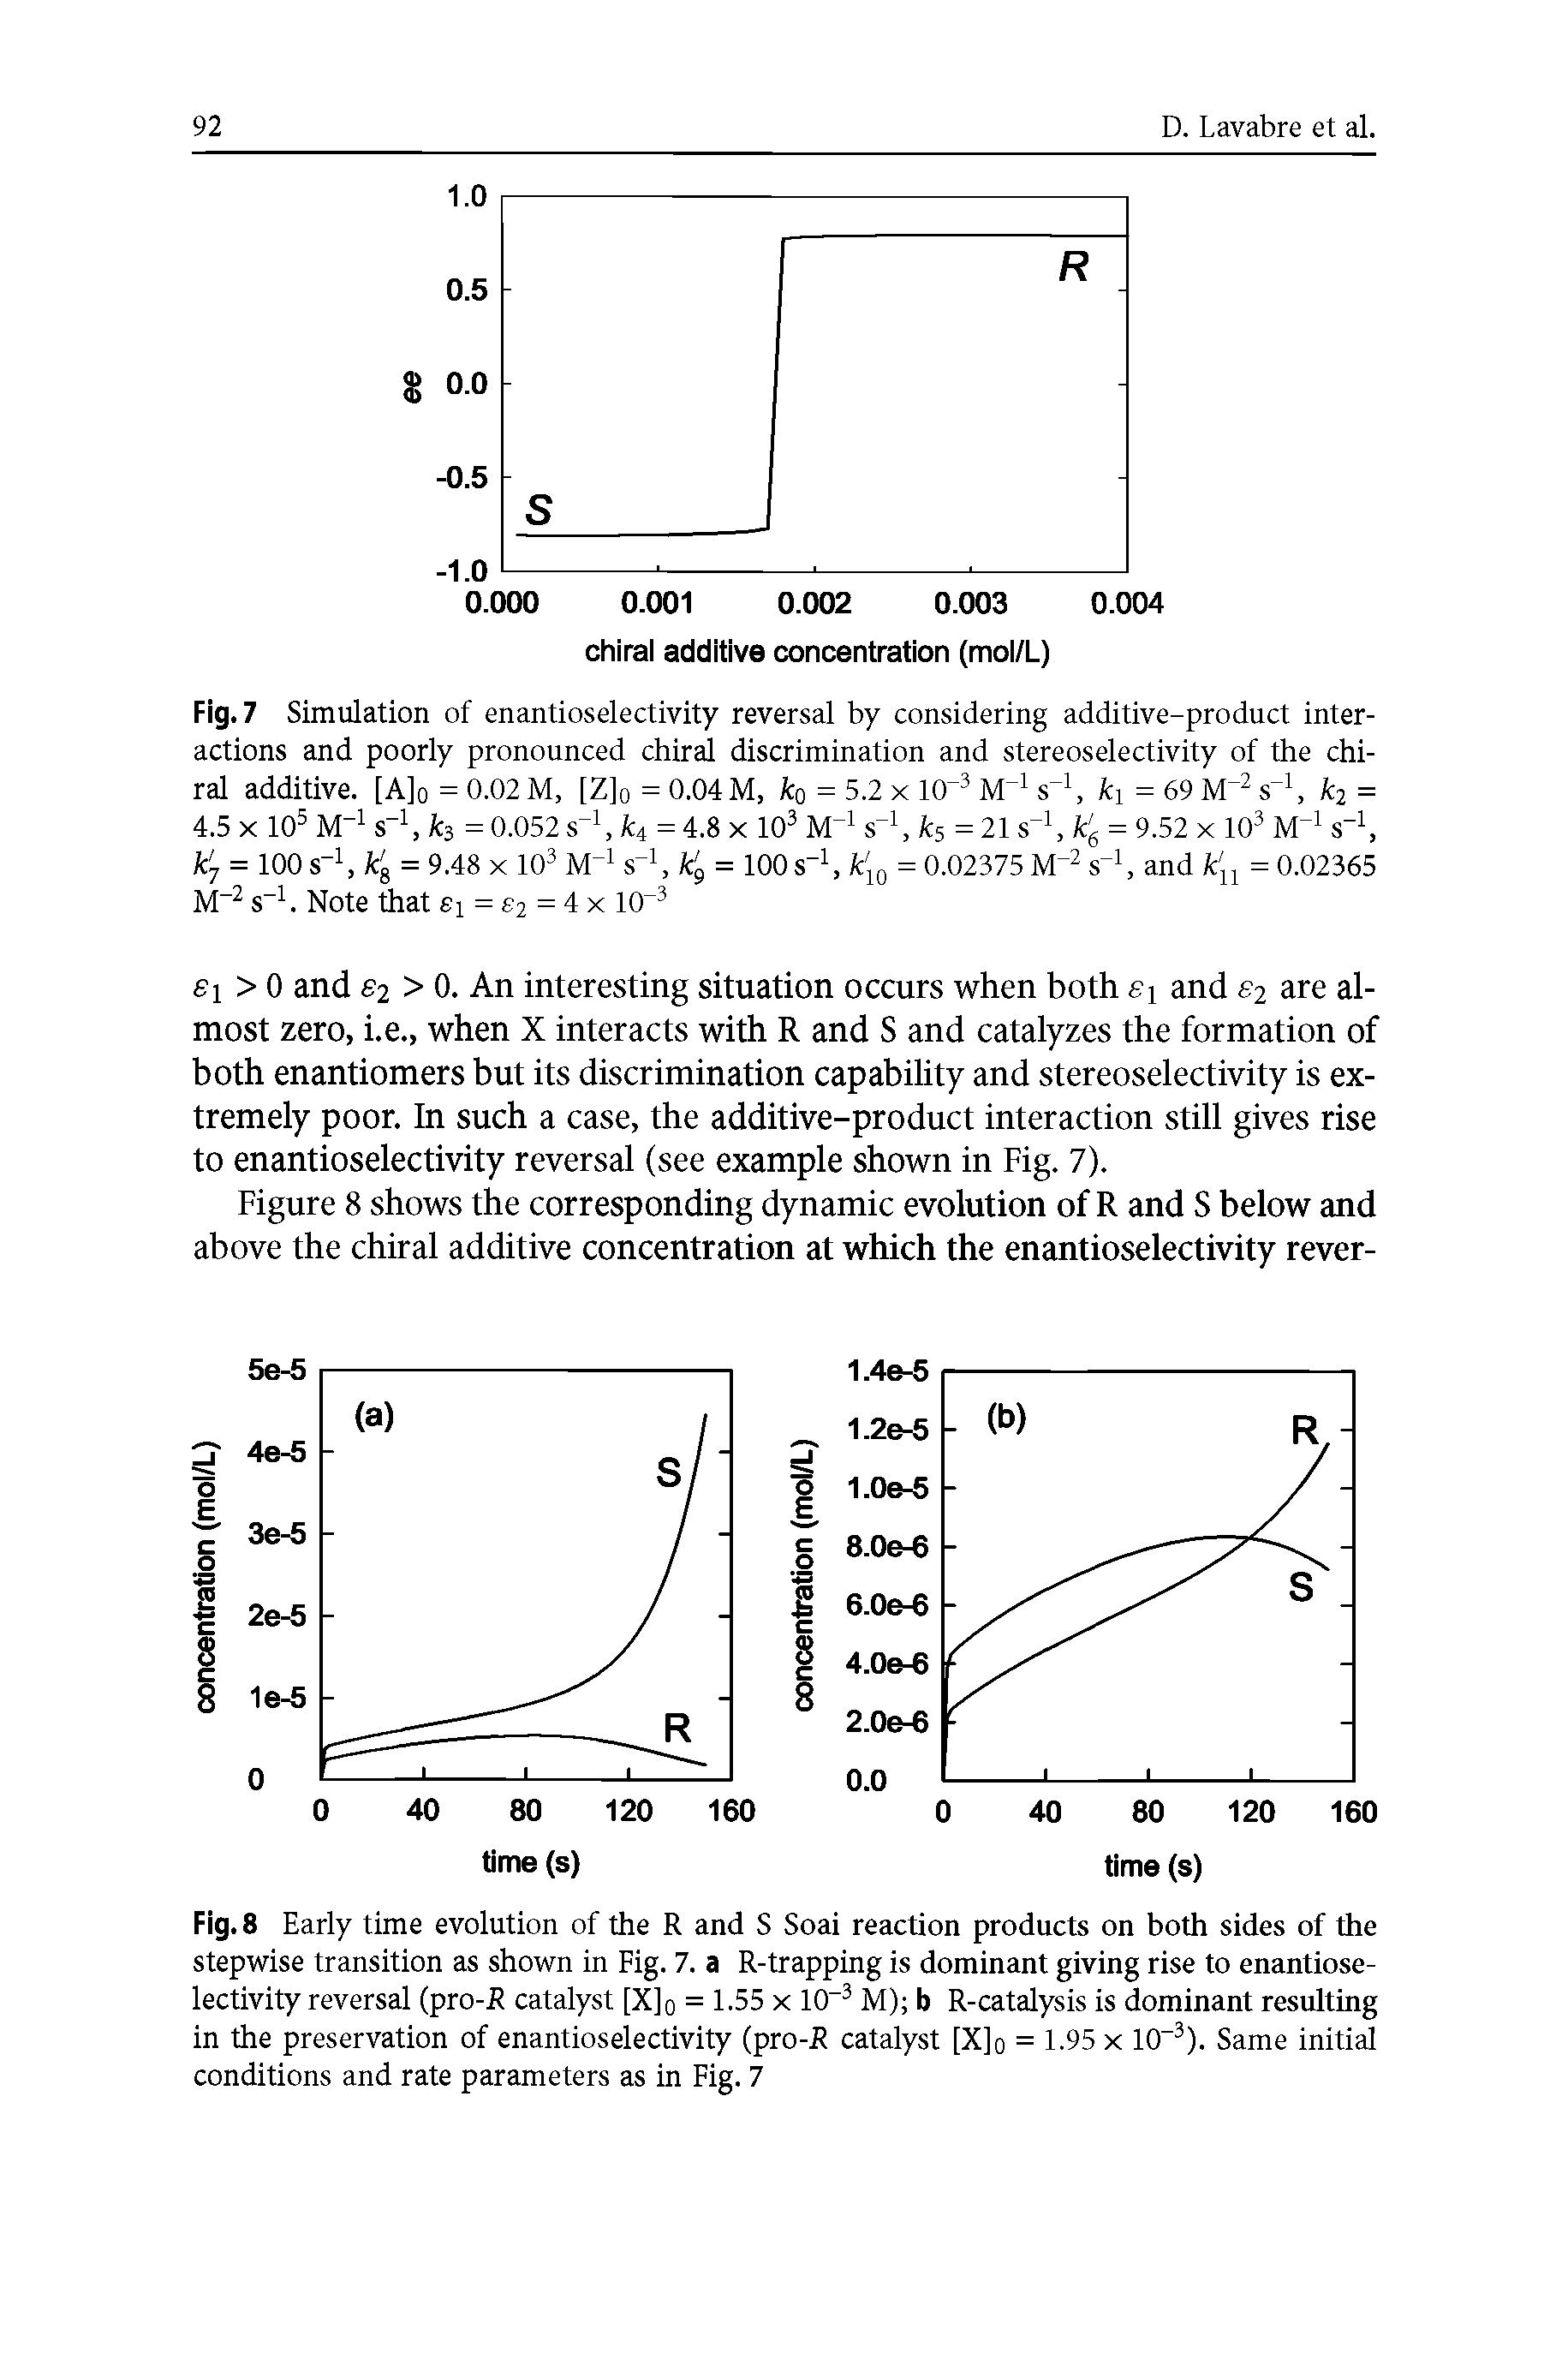 Fig. 8 Early time evolution of the R and S Soai reaction products on both sides of the stepwise transition as shown in Fig. 7. a R-trapping is dominant giving rise to enantioselectivity reversal (pro-R catalyst [X]0 = 1.55 x 10 3 M) b R-catalysis is dominant resulting in the preservation of enantioselectivity (pro-R catalyst [X]o = 1.95 x 10-3). Same initial conditions and rate parameters as in Fig. 7...